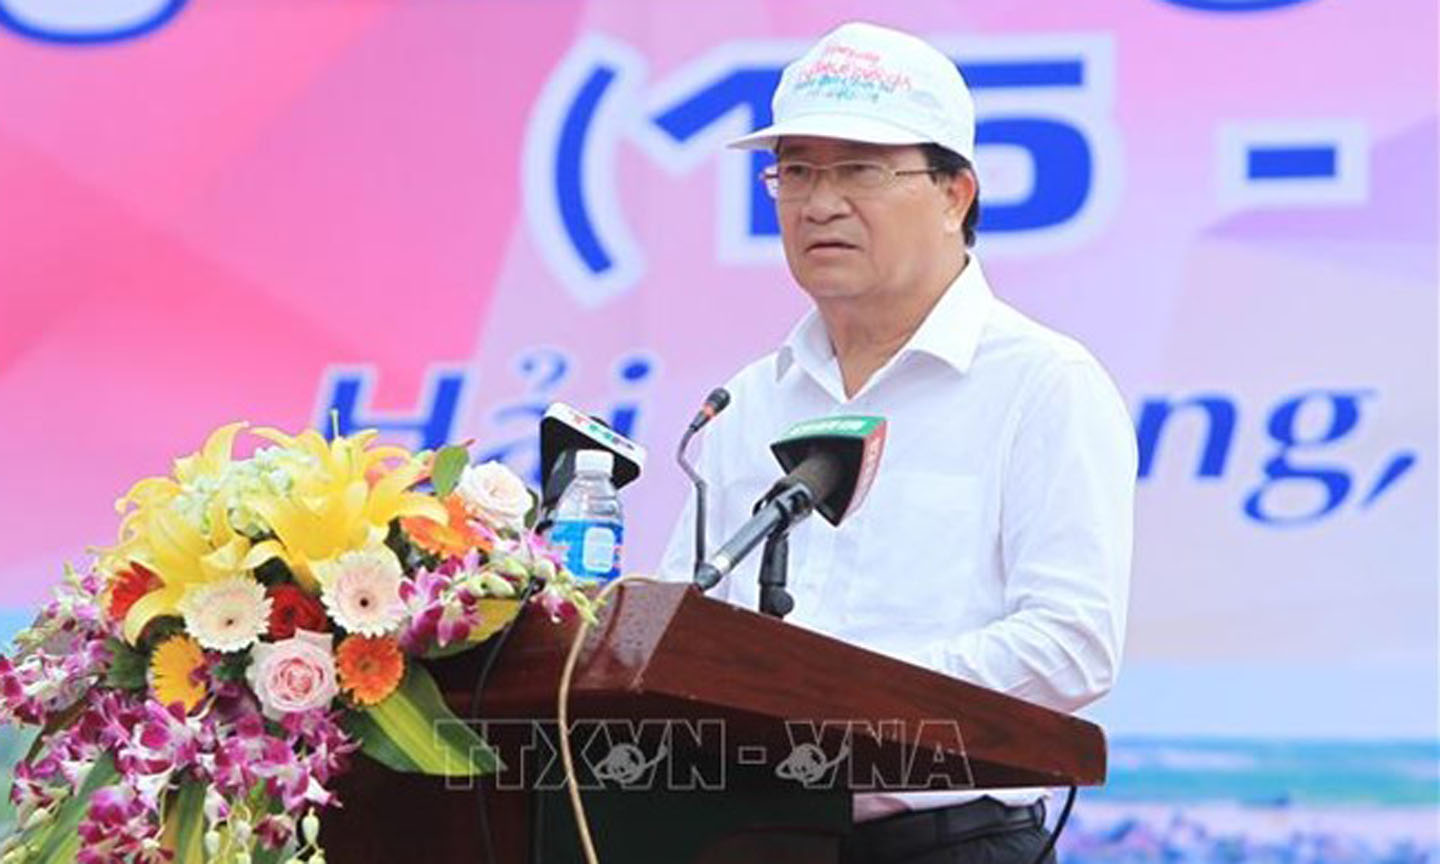 Deputy Prime Minister Trinh Dinh Dung, head of the Central Steering Committee for Natural Disaster Prevention and Control, speaks at the event. (Photo: VNA)